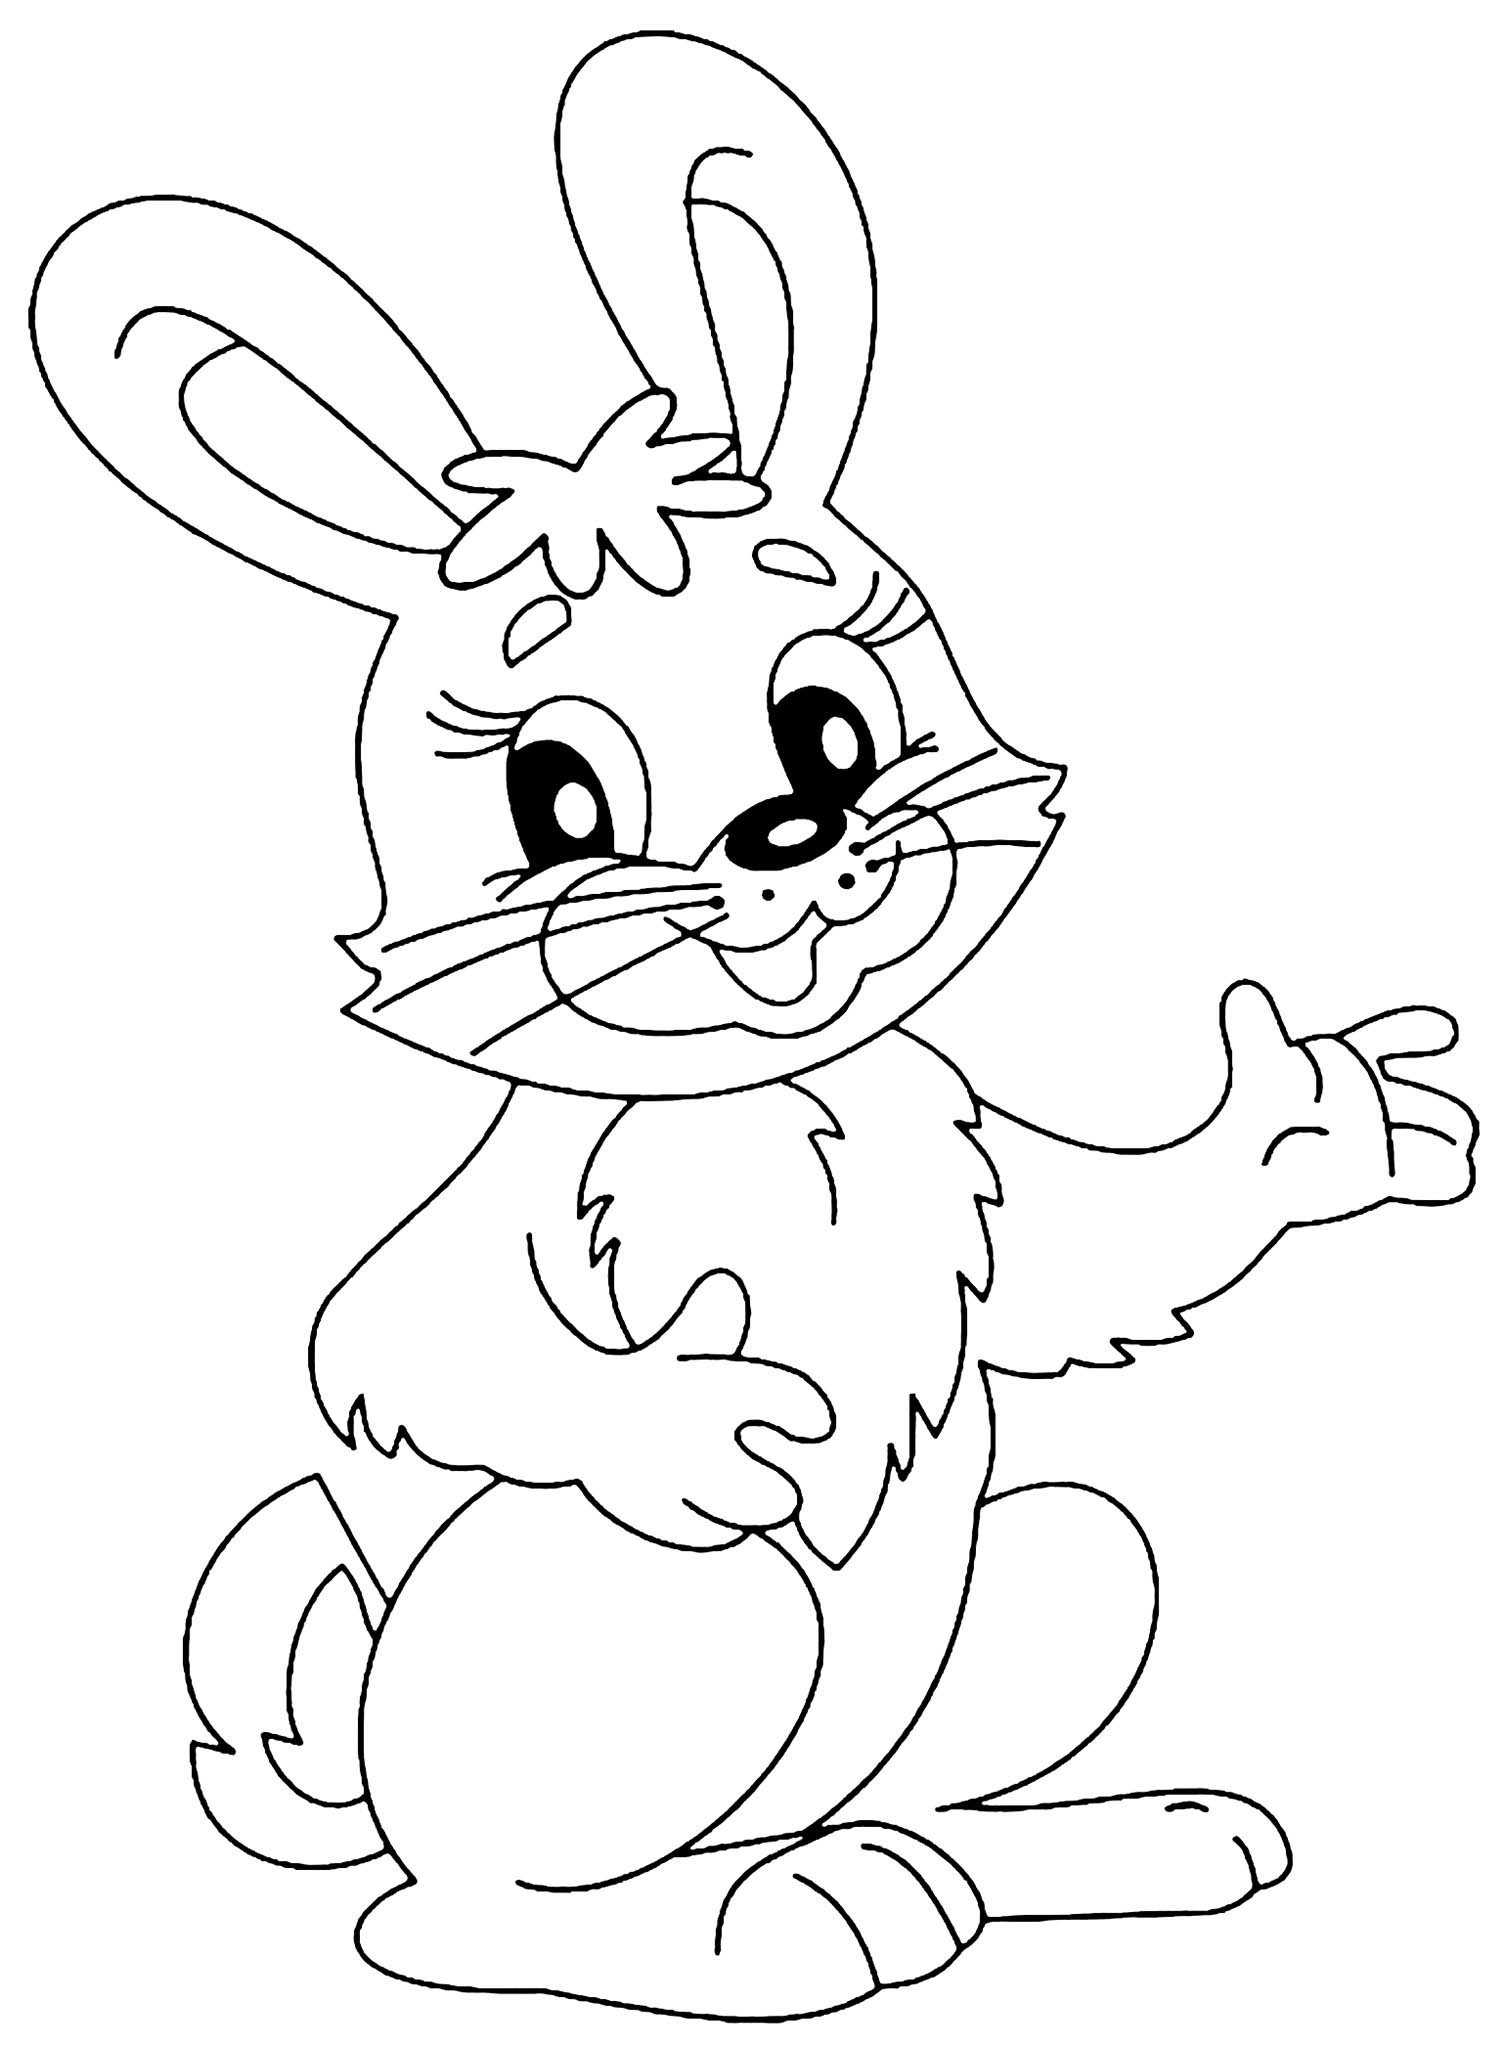 Simple rabbit coloring for kids